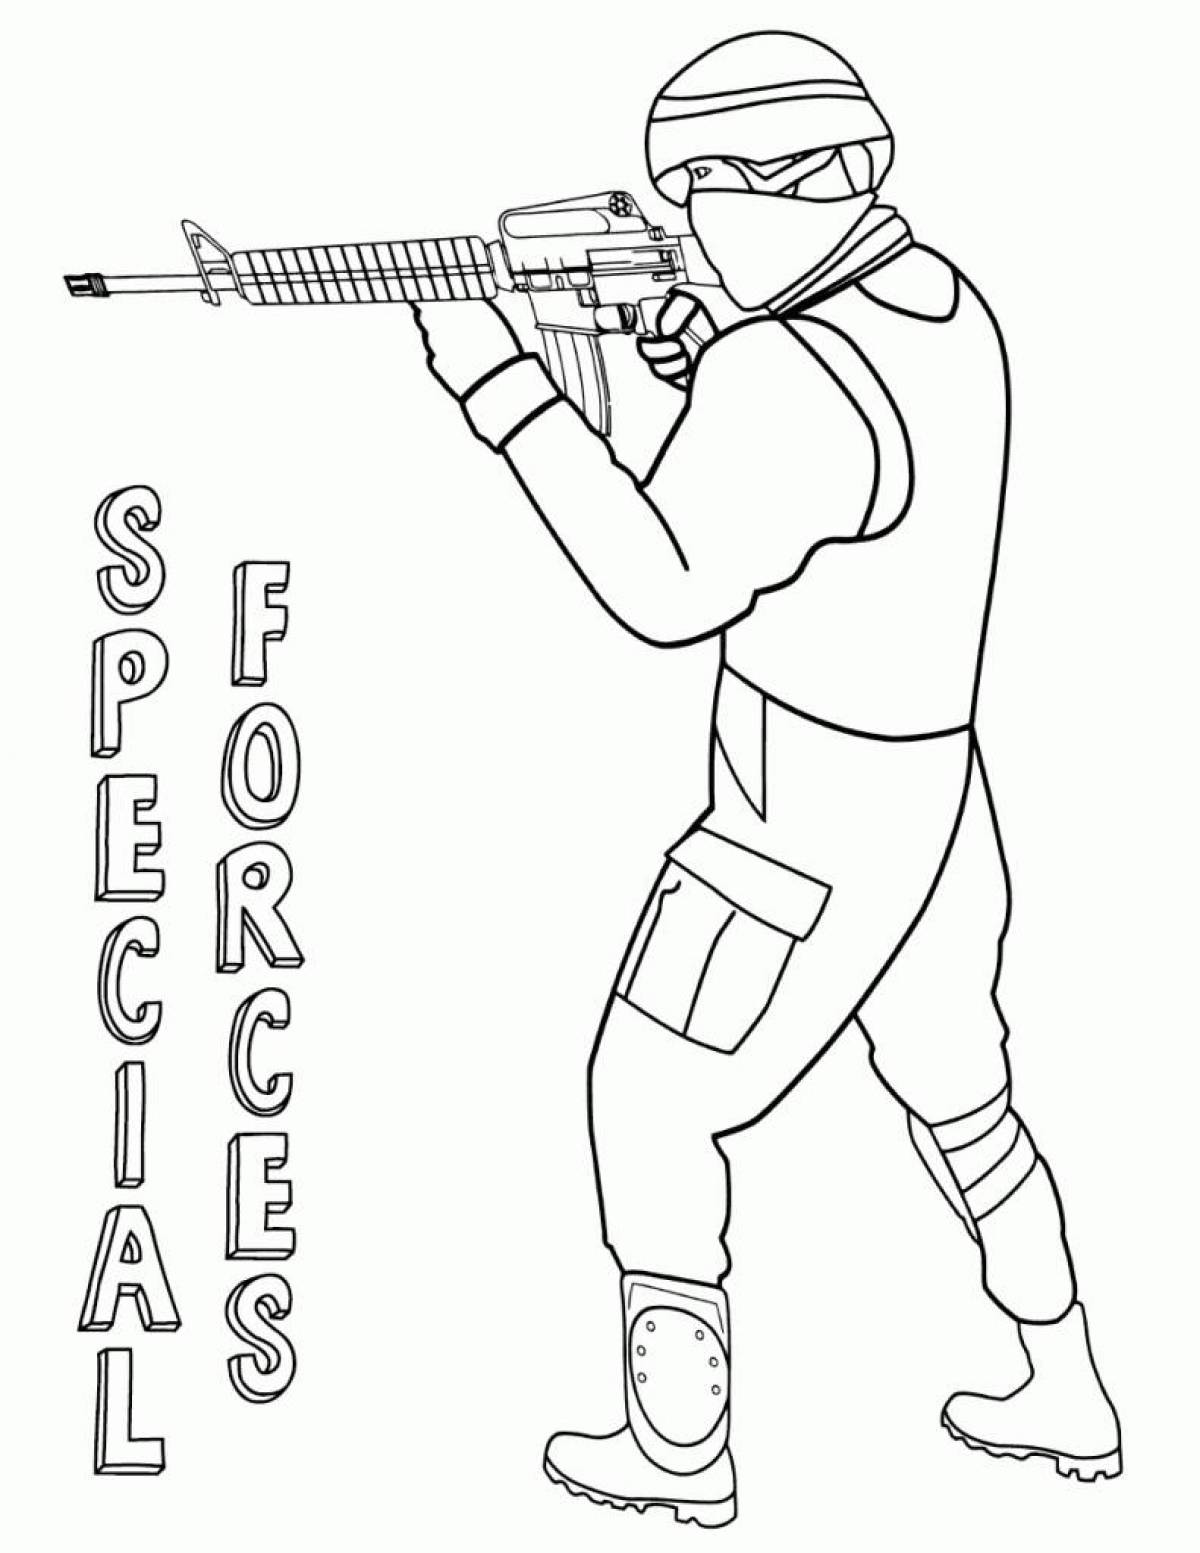 Formidable Special Forces coloring page